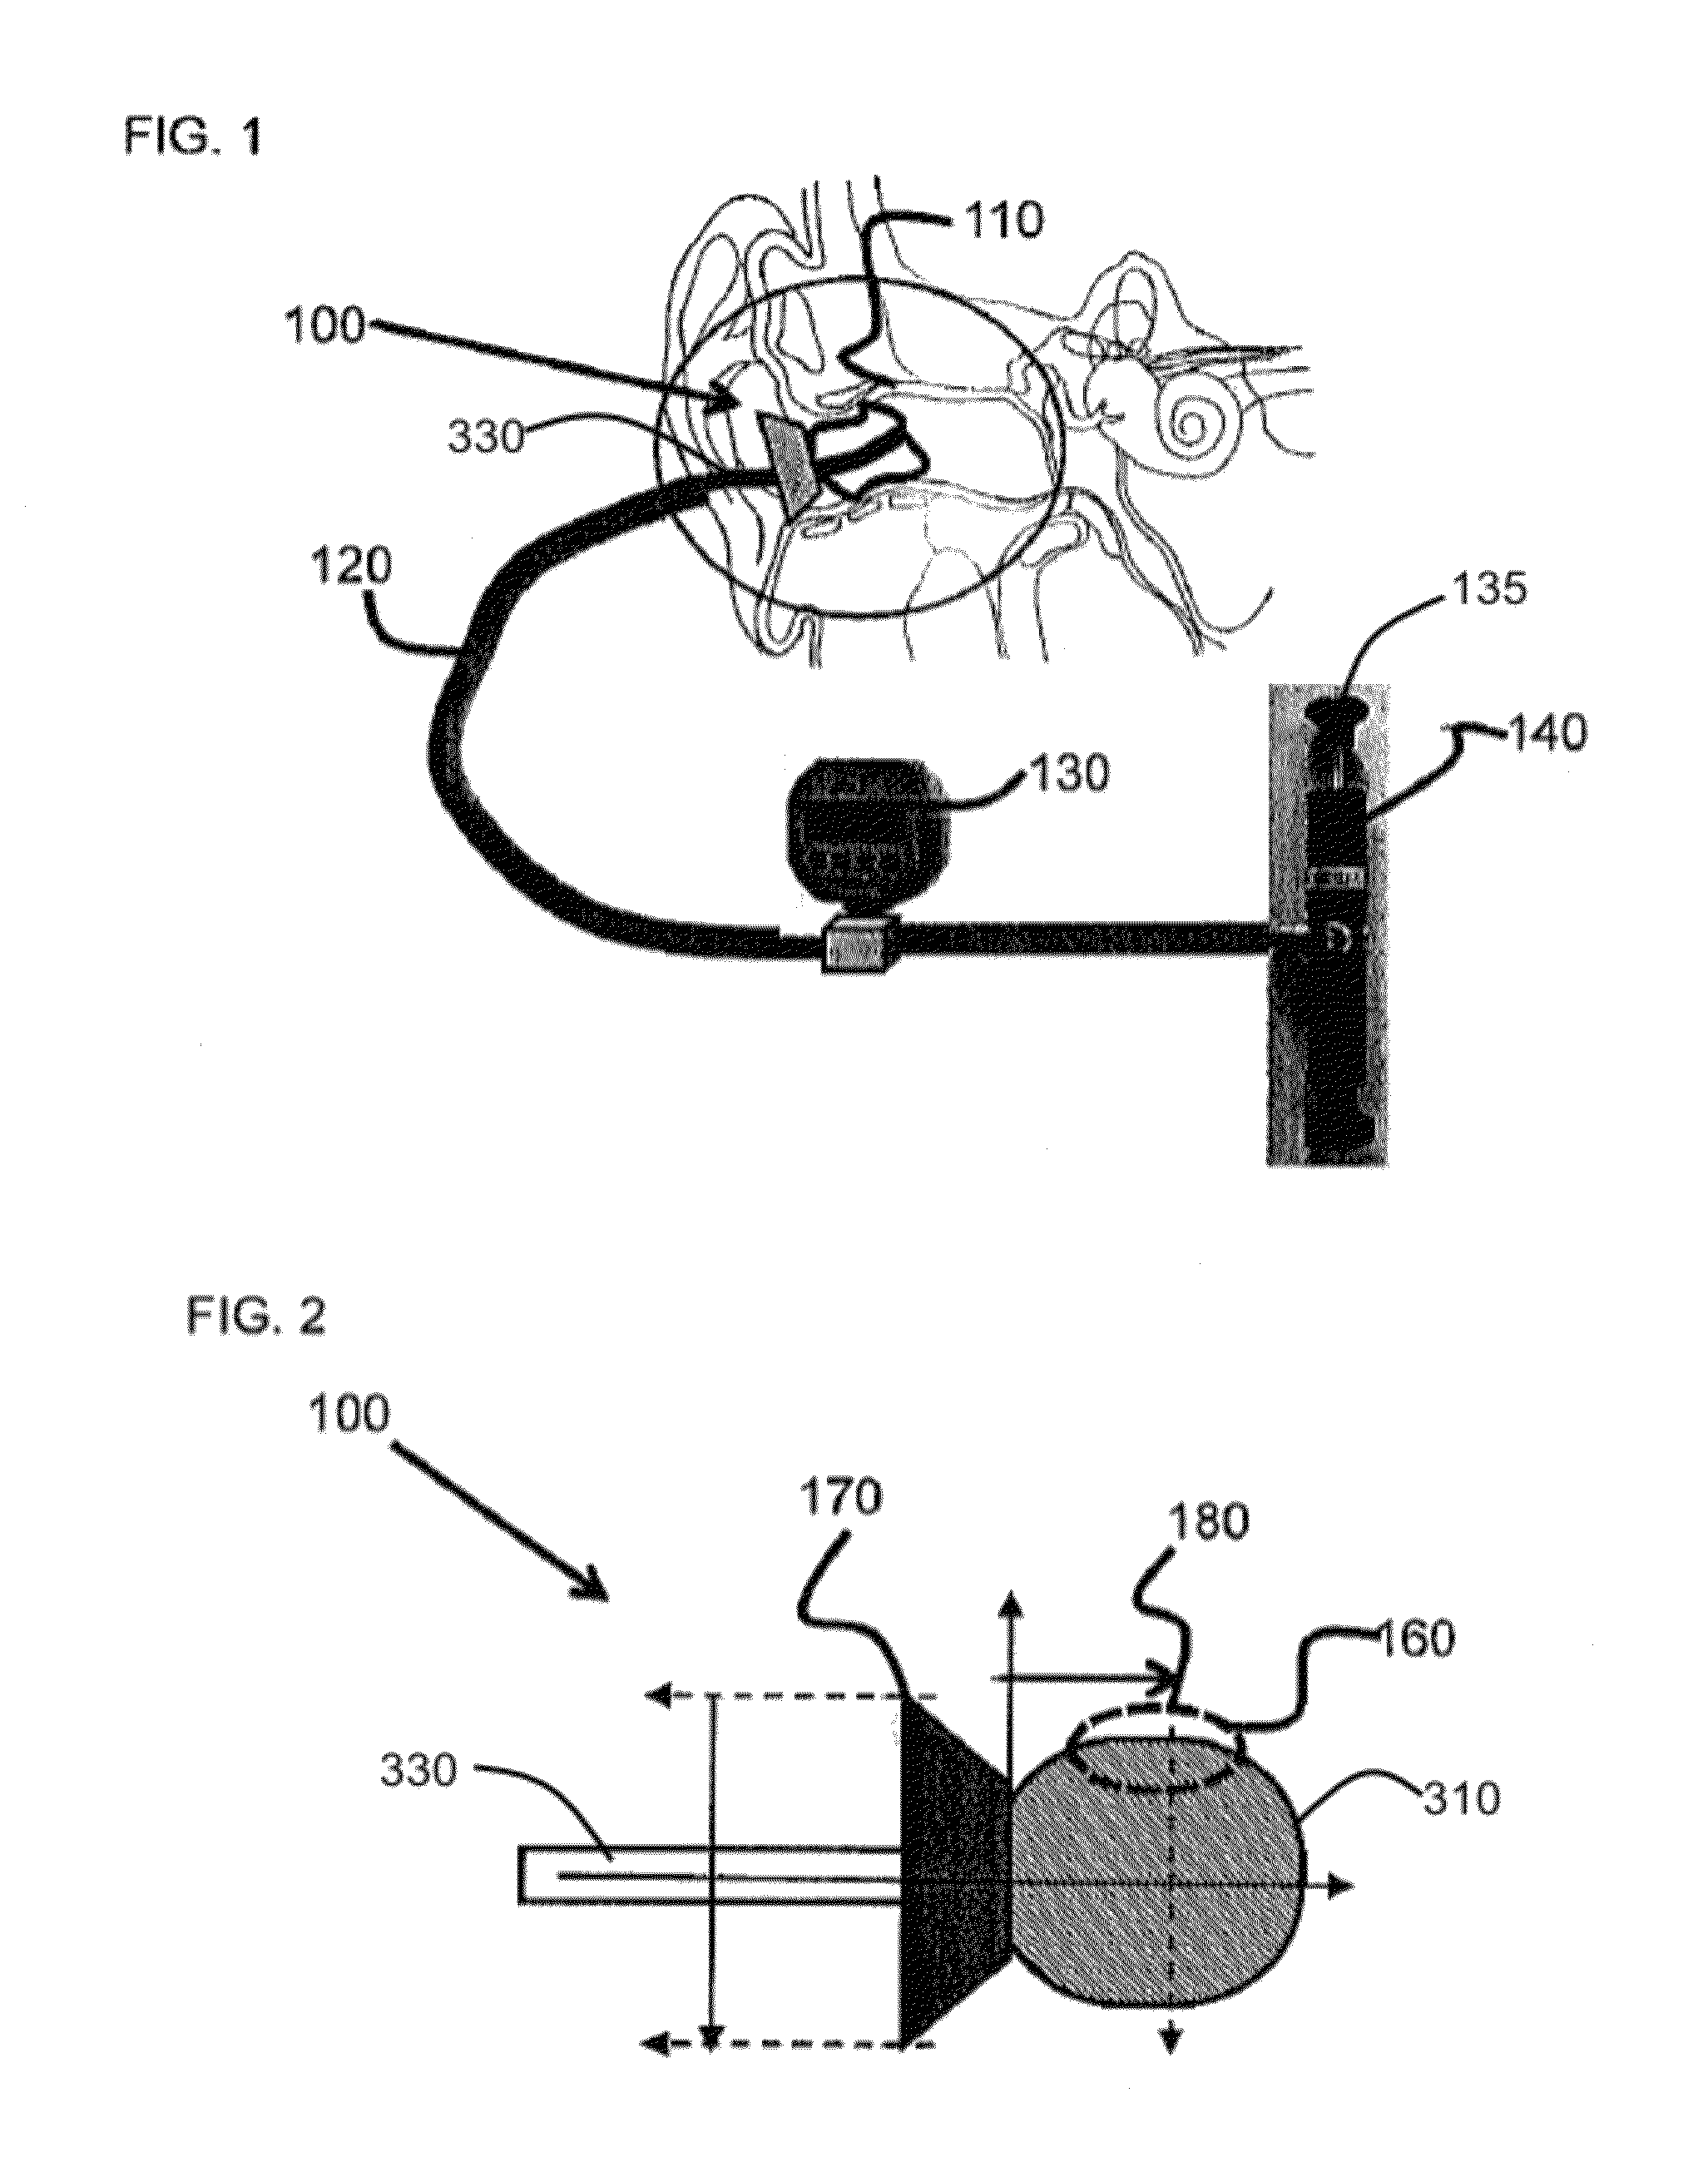 Device and method for radial pressure determination